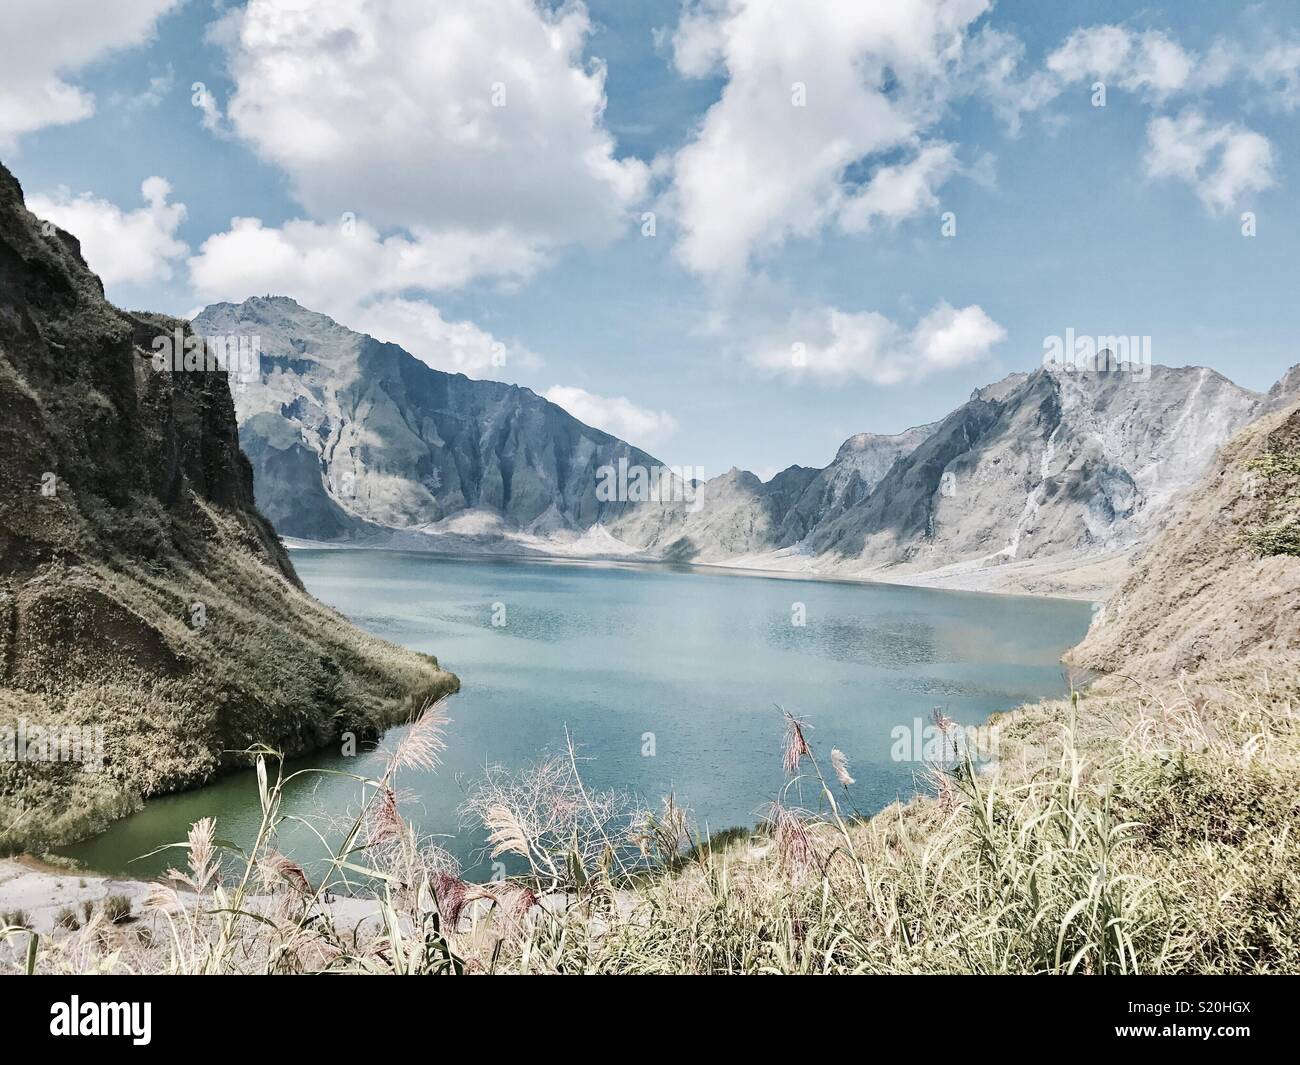 This is Mount Pinatubo which is an active volcano located at the tripoint boundary of the Philippine provinces of Zambales, Tarlac and Pampanga. Stock Photo